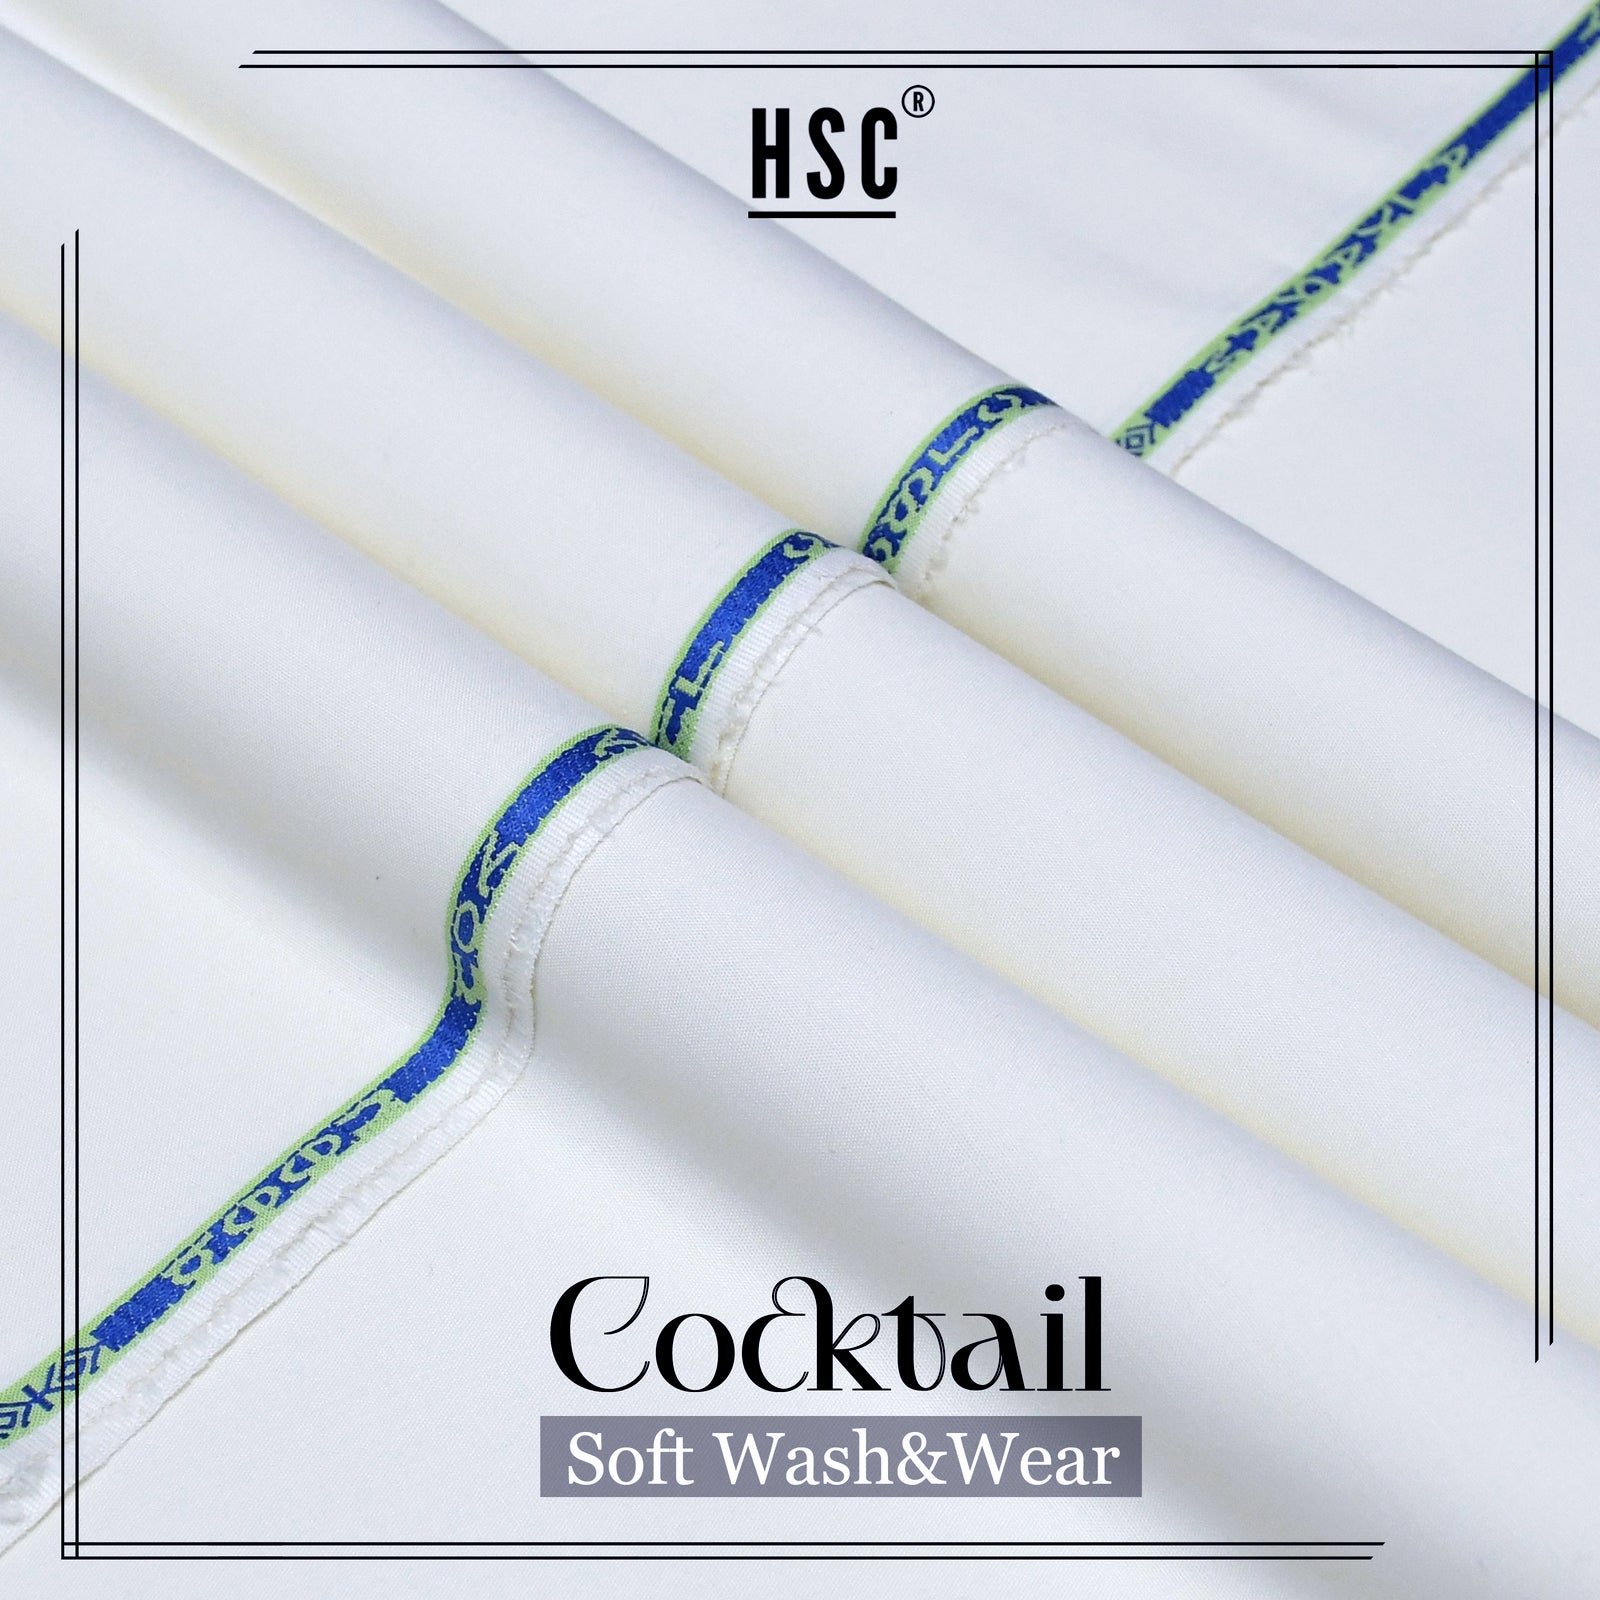 Buy 1 Get 1 Free Cocktail Soft Wash&Wear - CSW19 HSC BLENDED